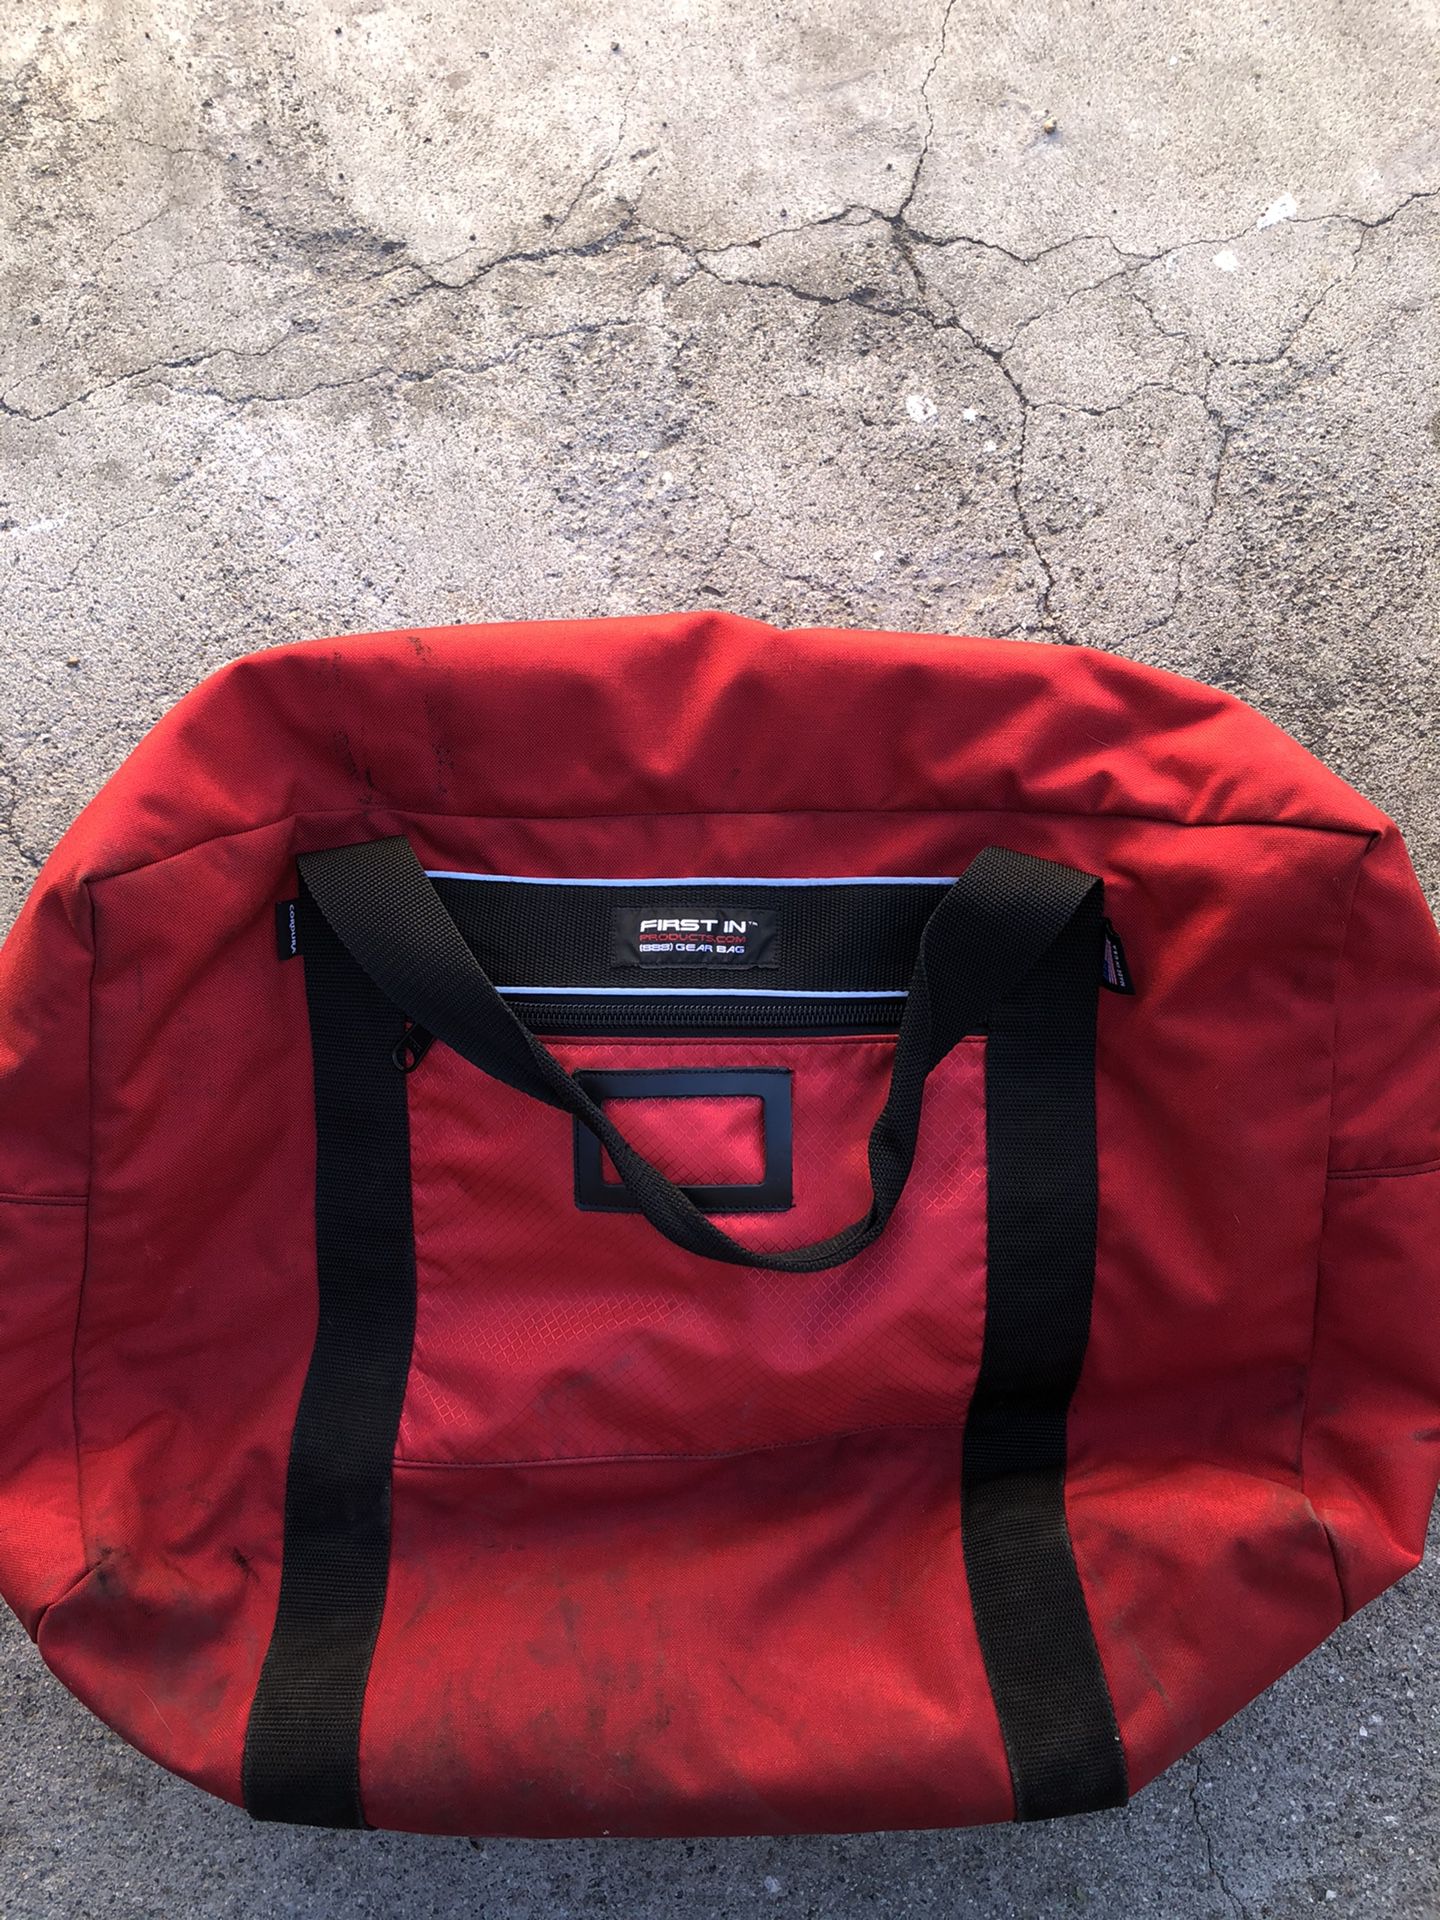 First in fire fighter turnout bag